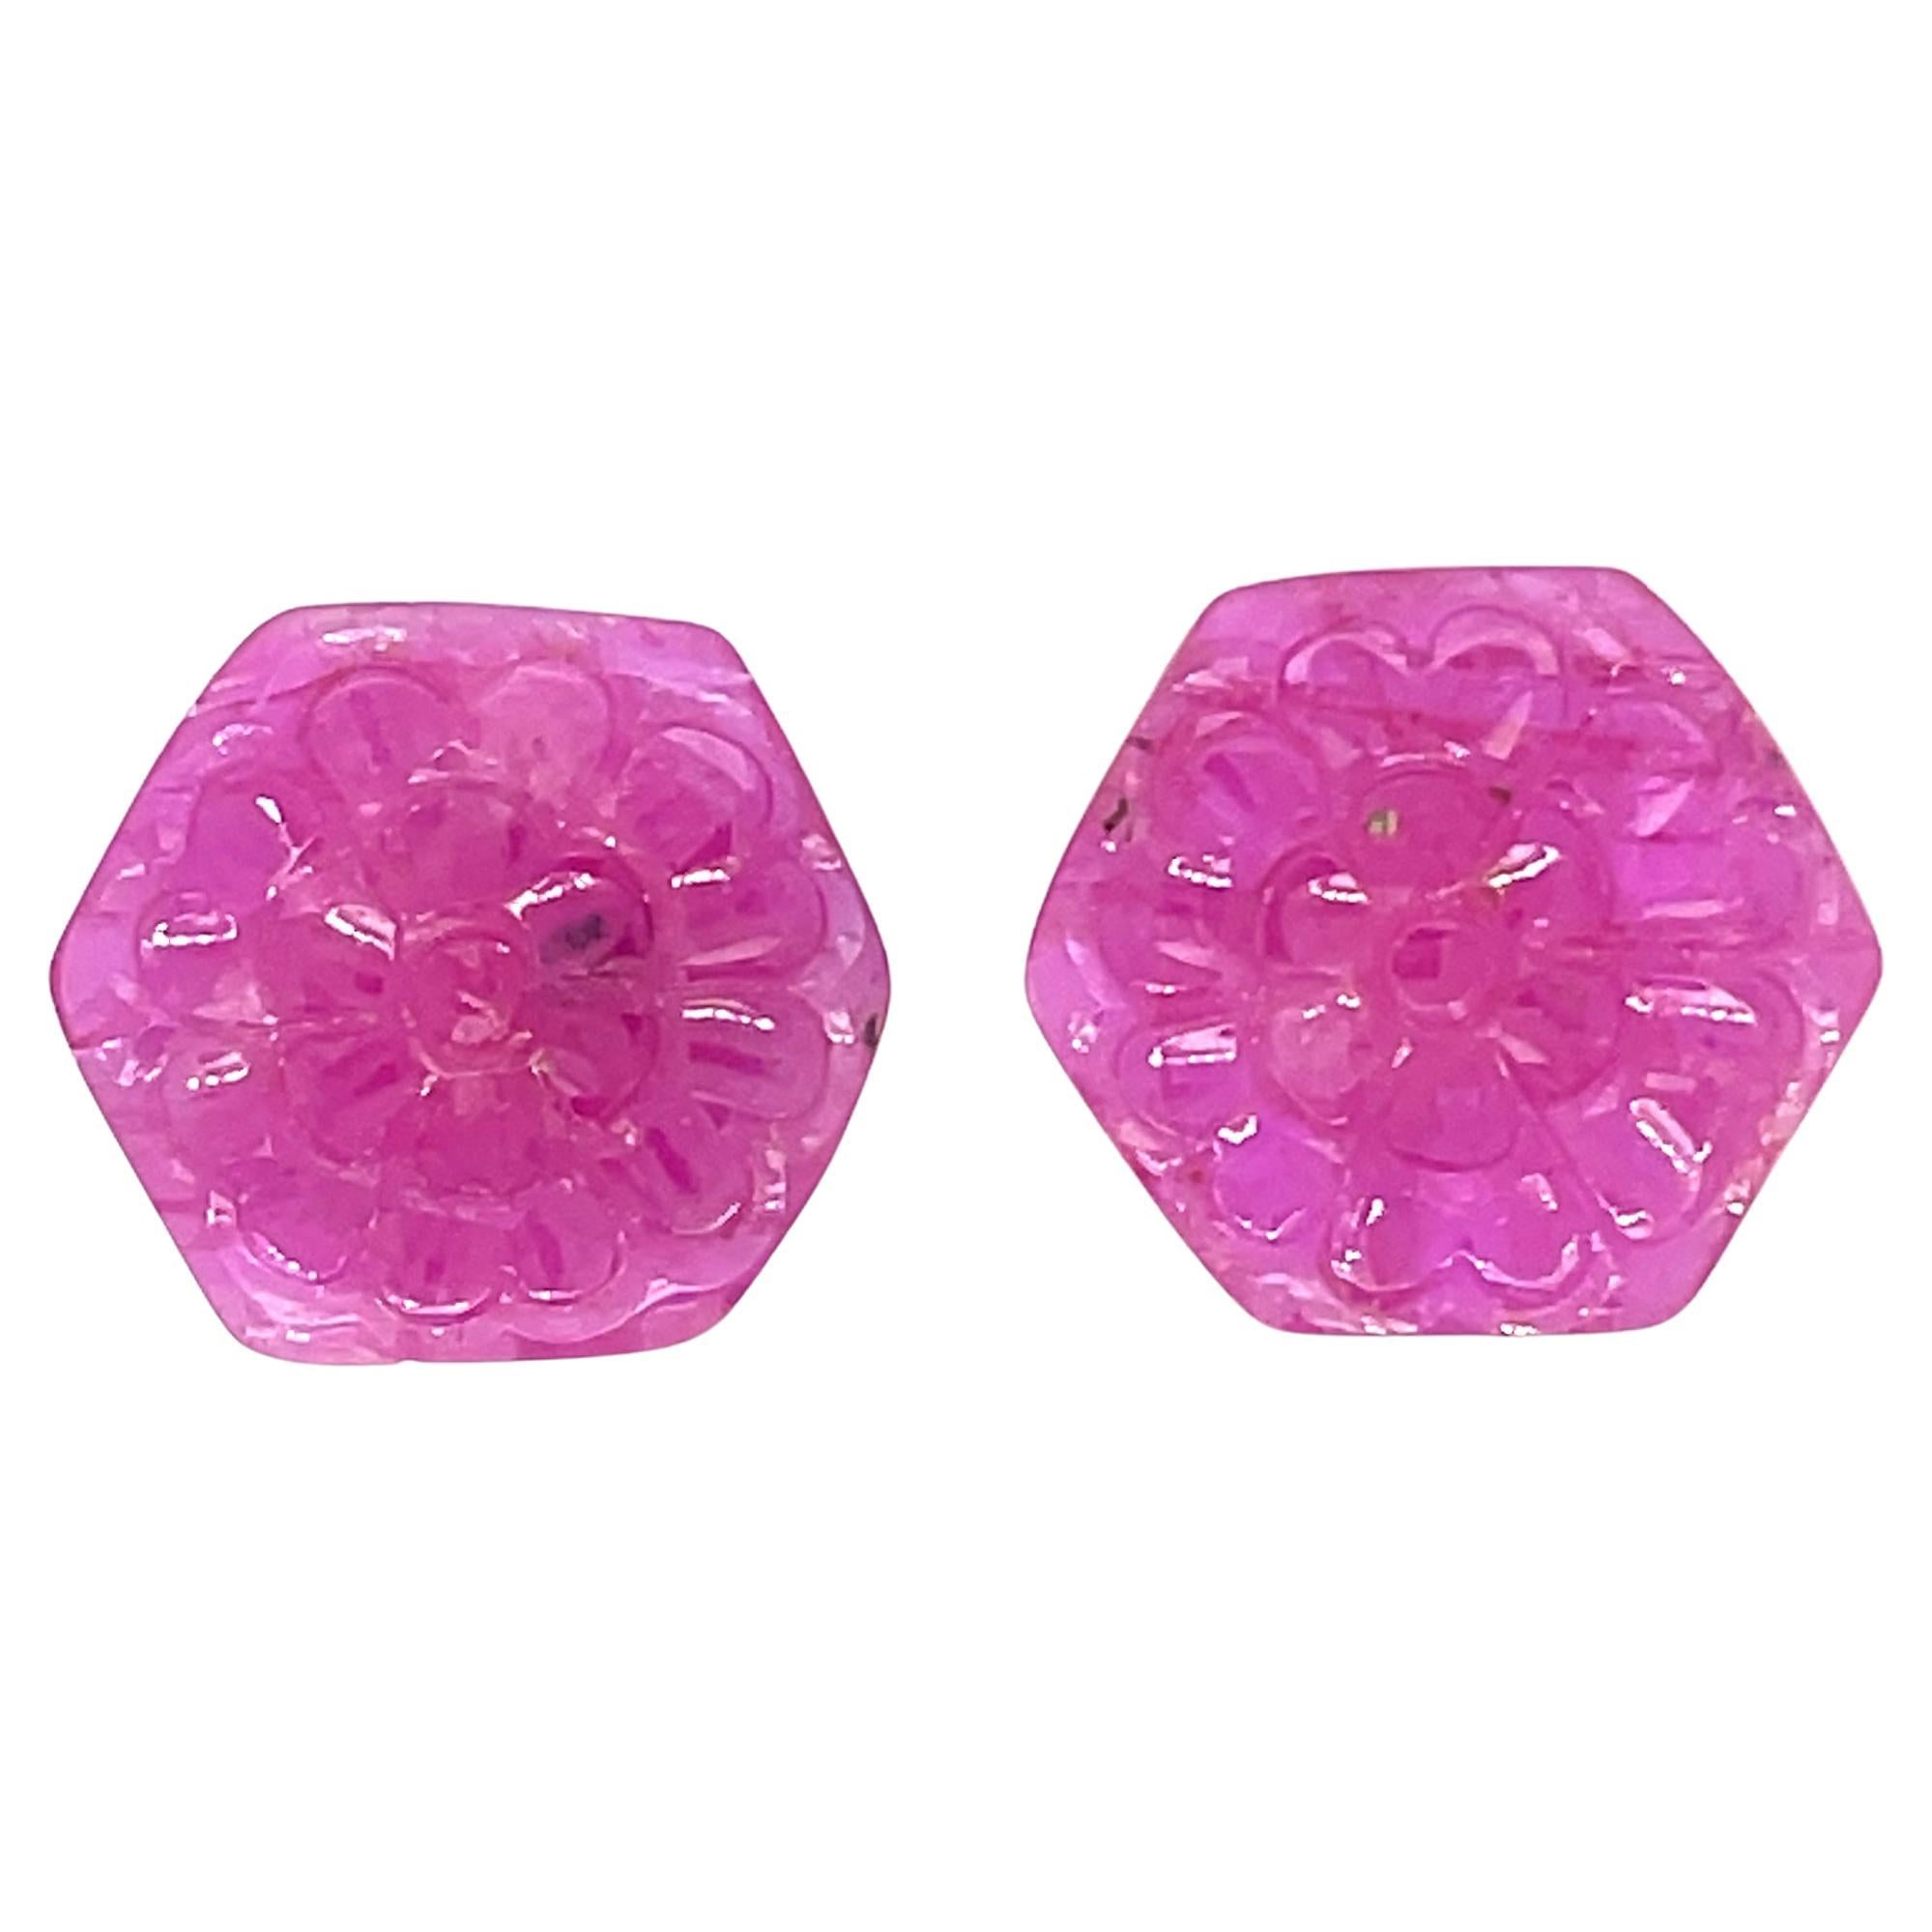 2 Hexagon-Shaped Ruby Carvings Cts 17.47 For Sale